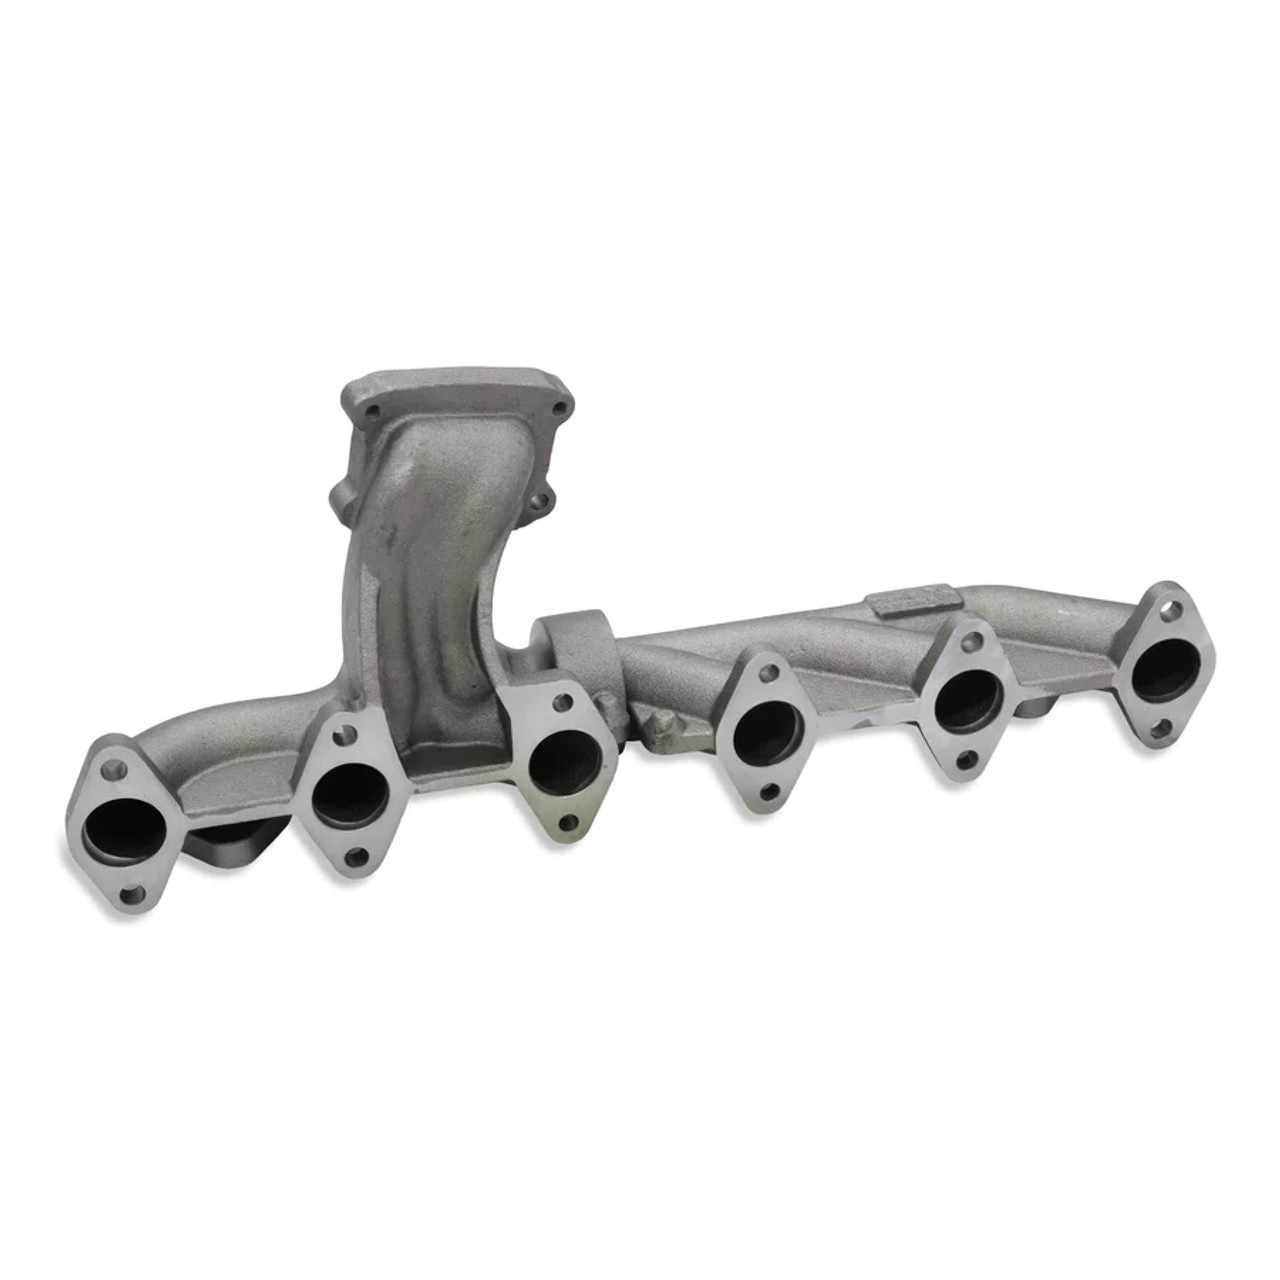  Smeding Diesel 2 Piece OEM Replacement Exhaust Manifold for 2019 to 2022 Dodge 6.7L Cummins (SD_2P_EM) New View